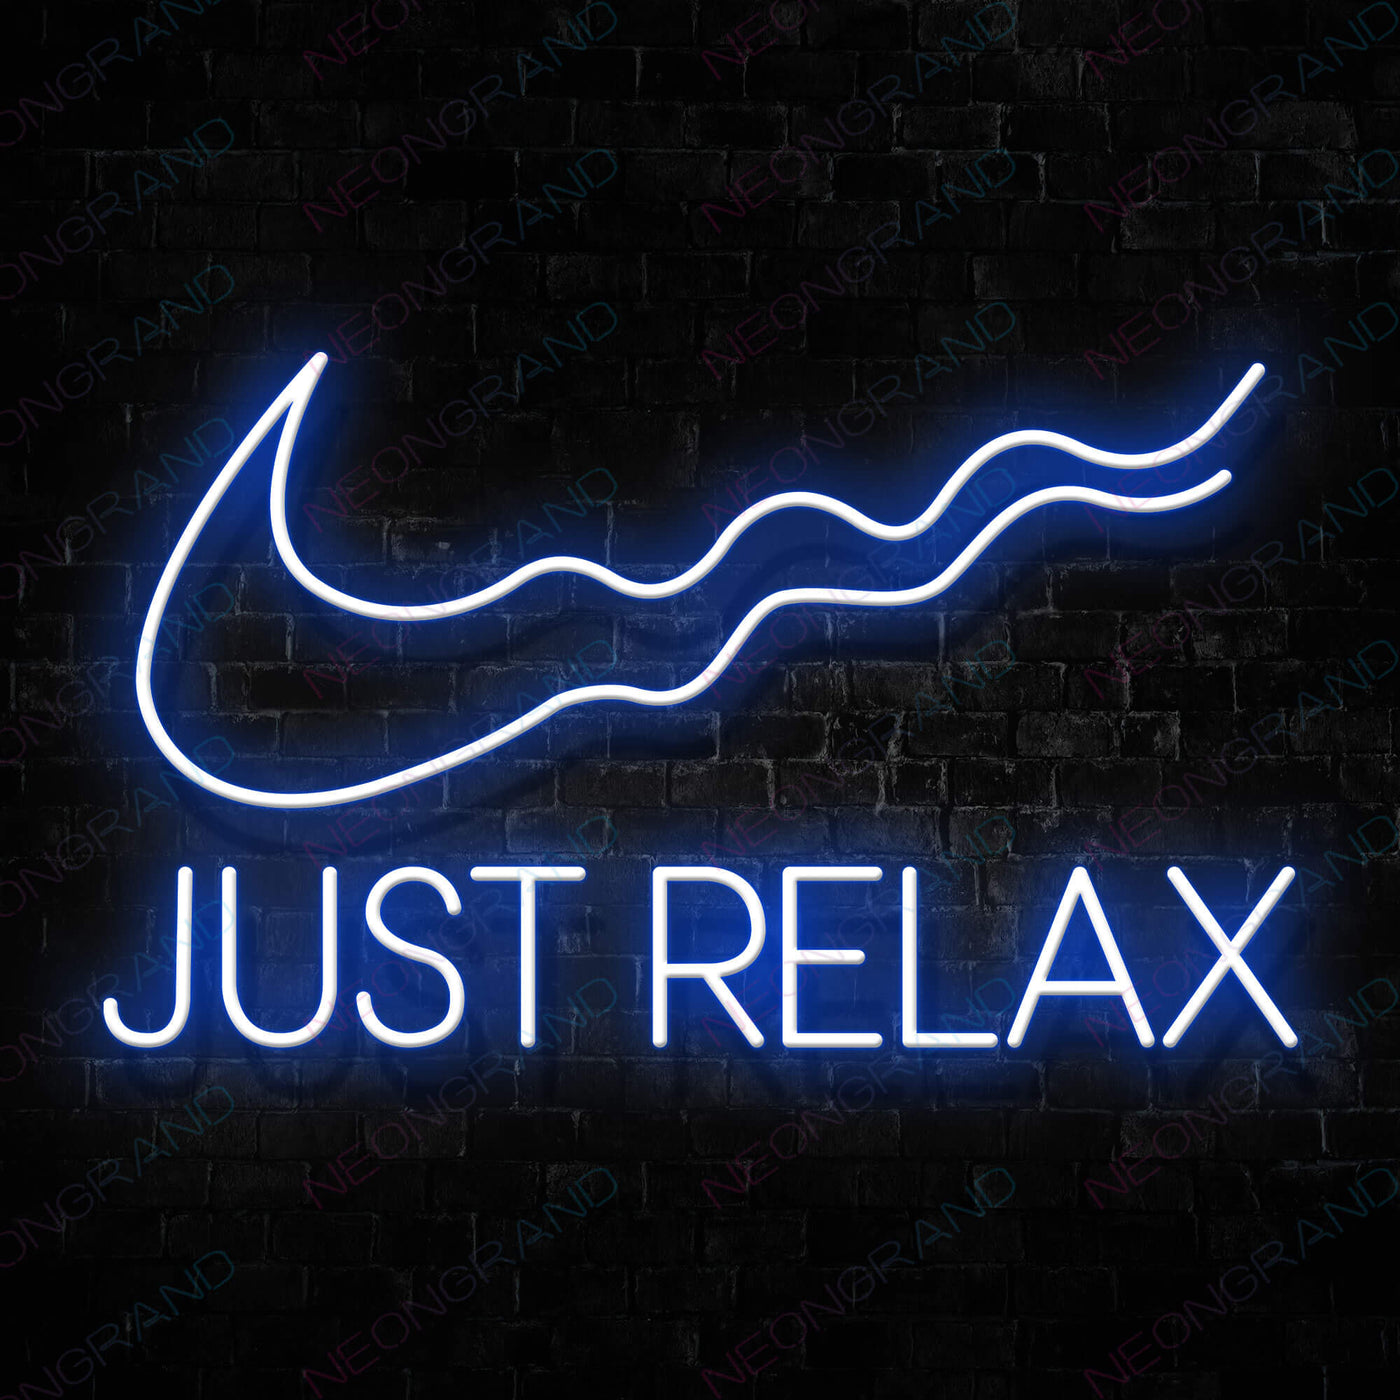 Just Relax Neon Sign Led Light blue